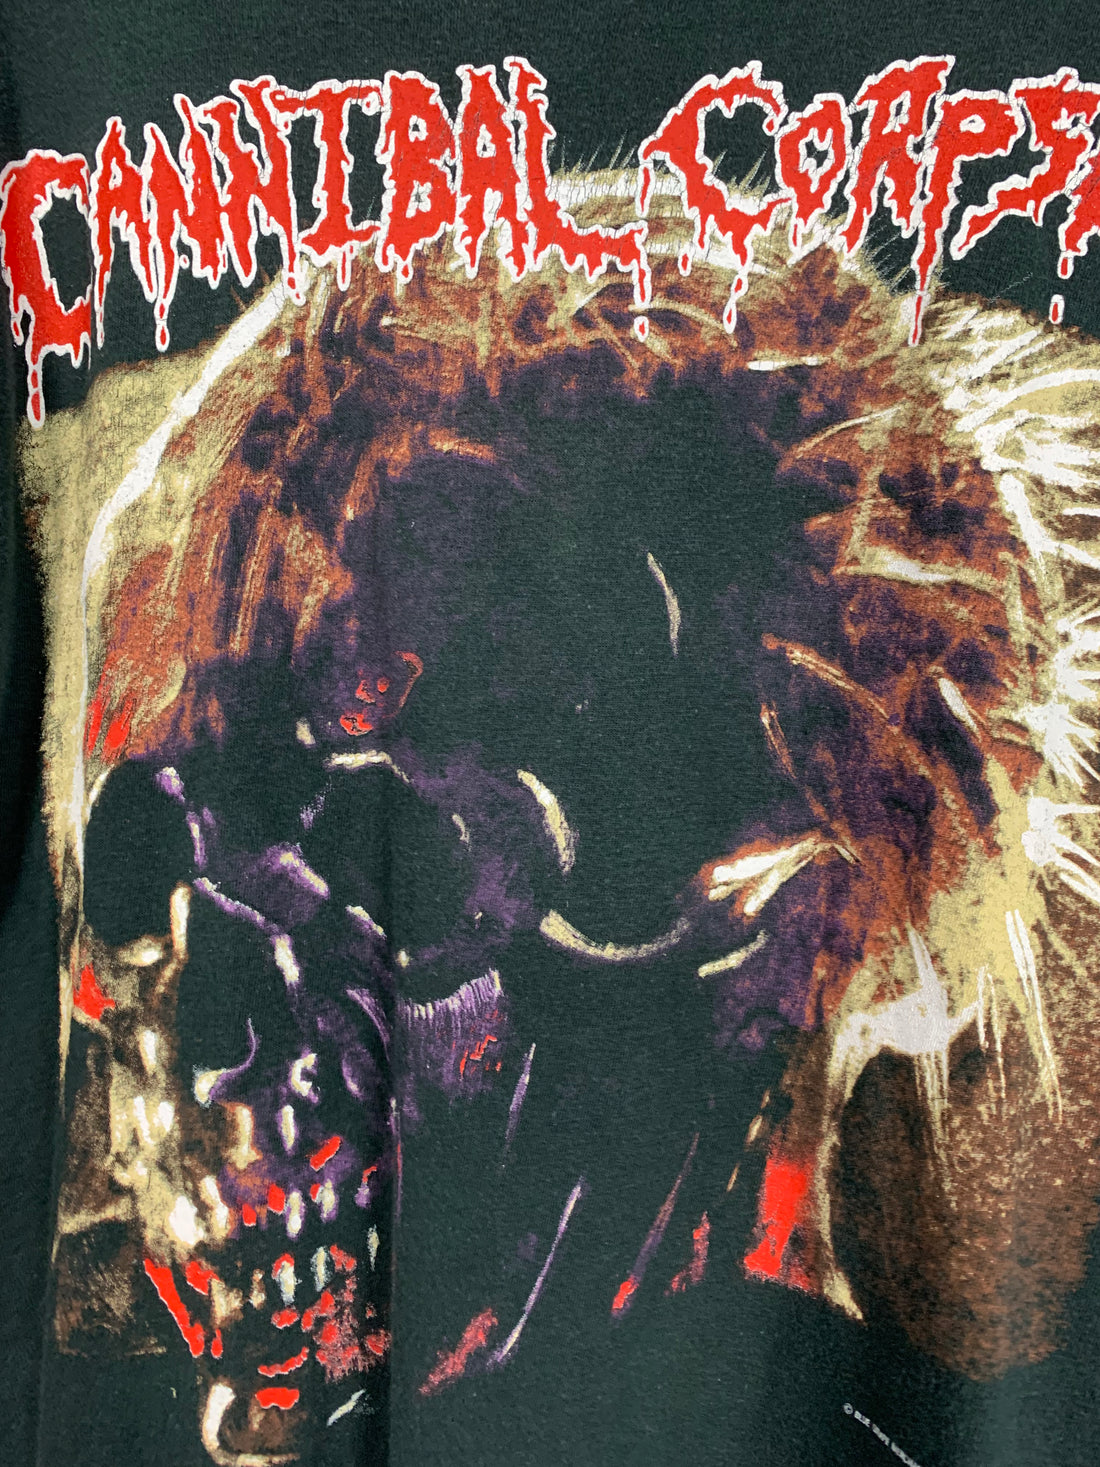 Cannibal Corpse 1993 Vintage T-Shirt